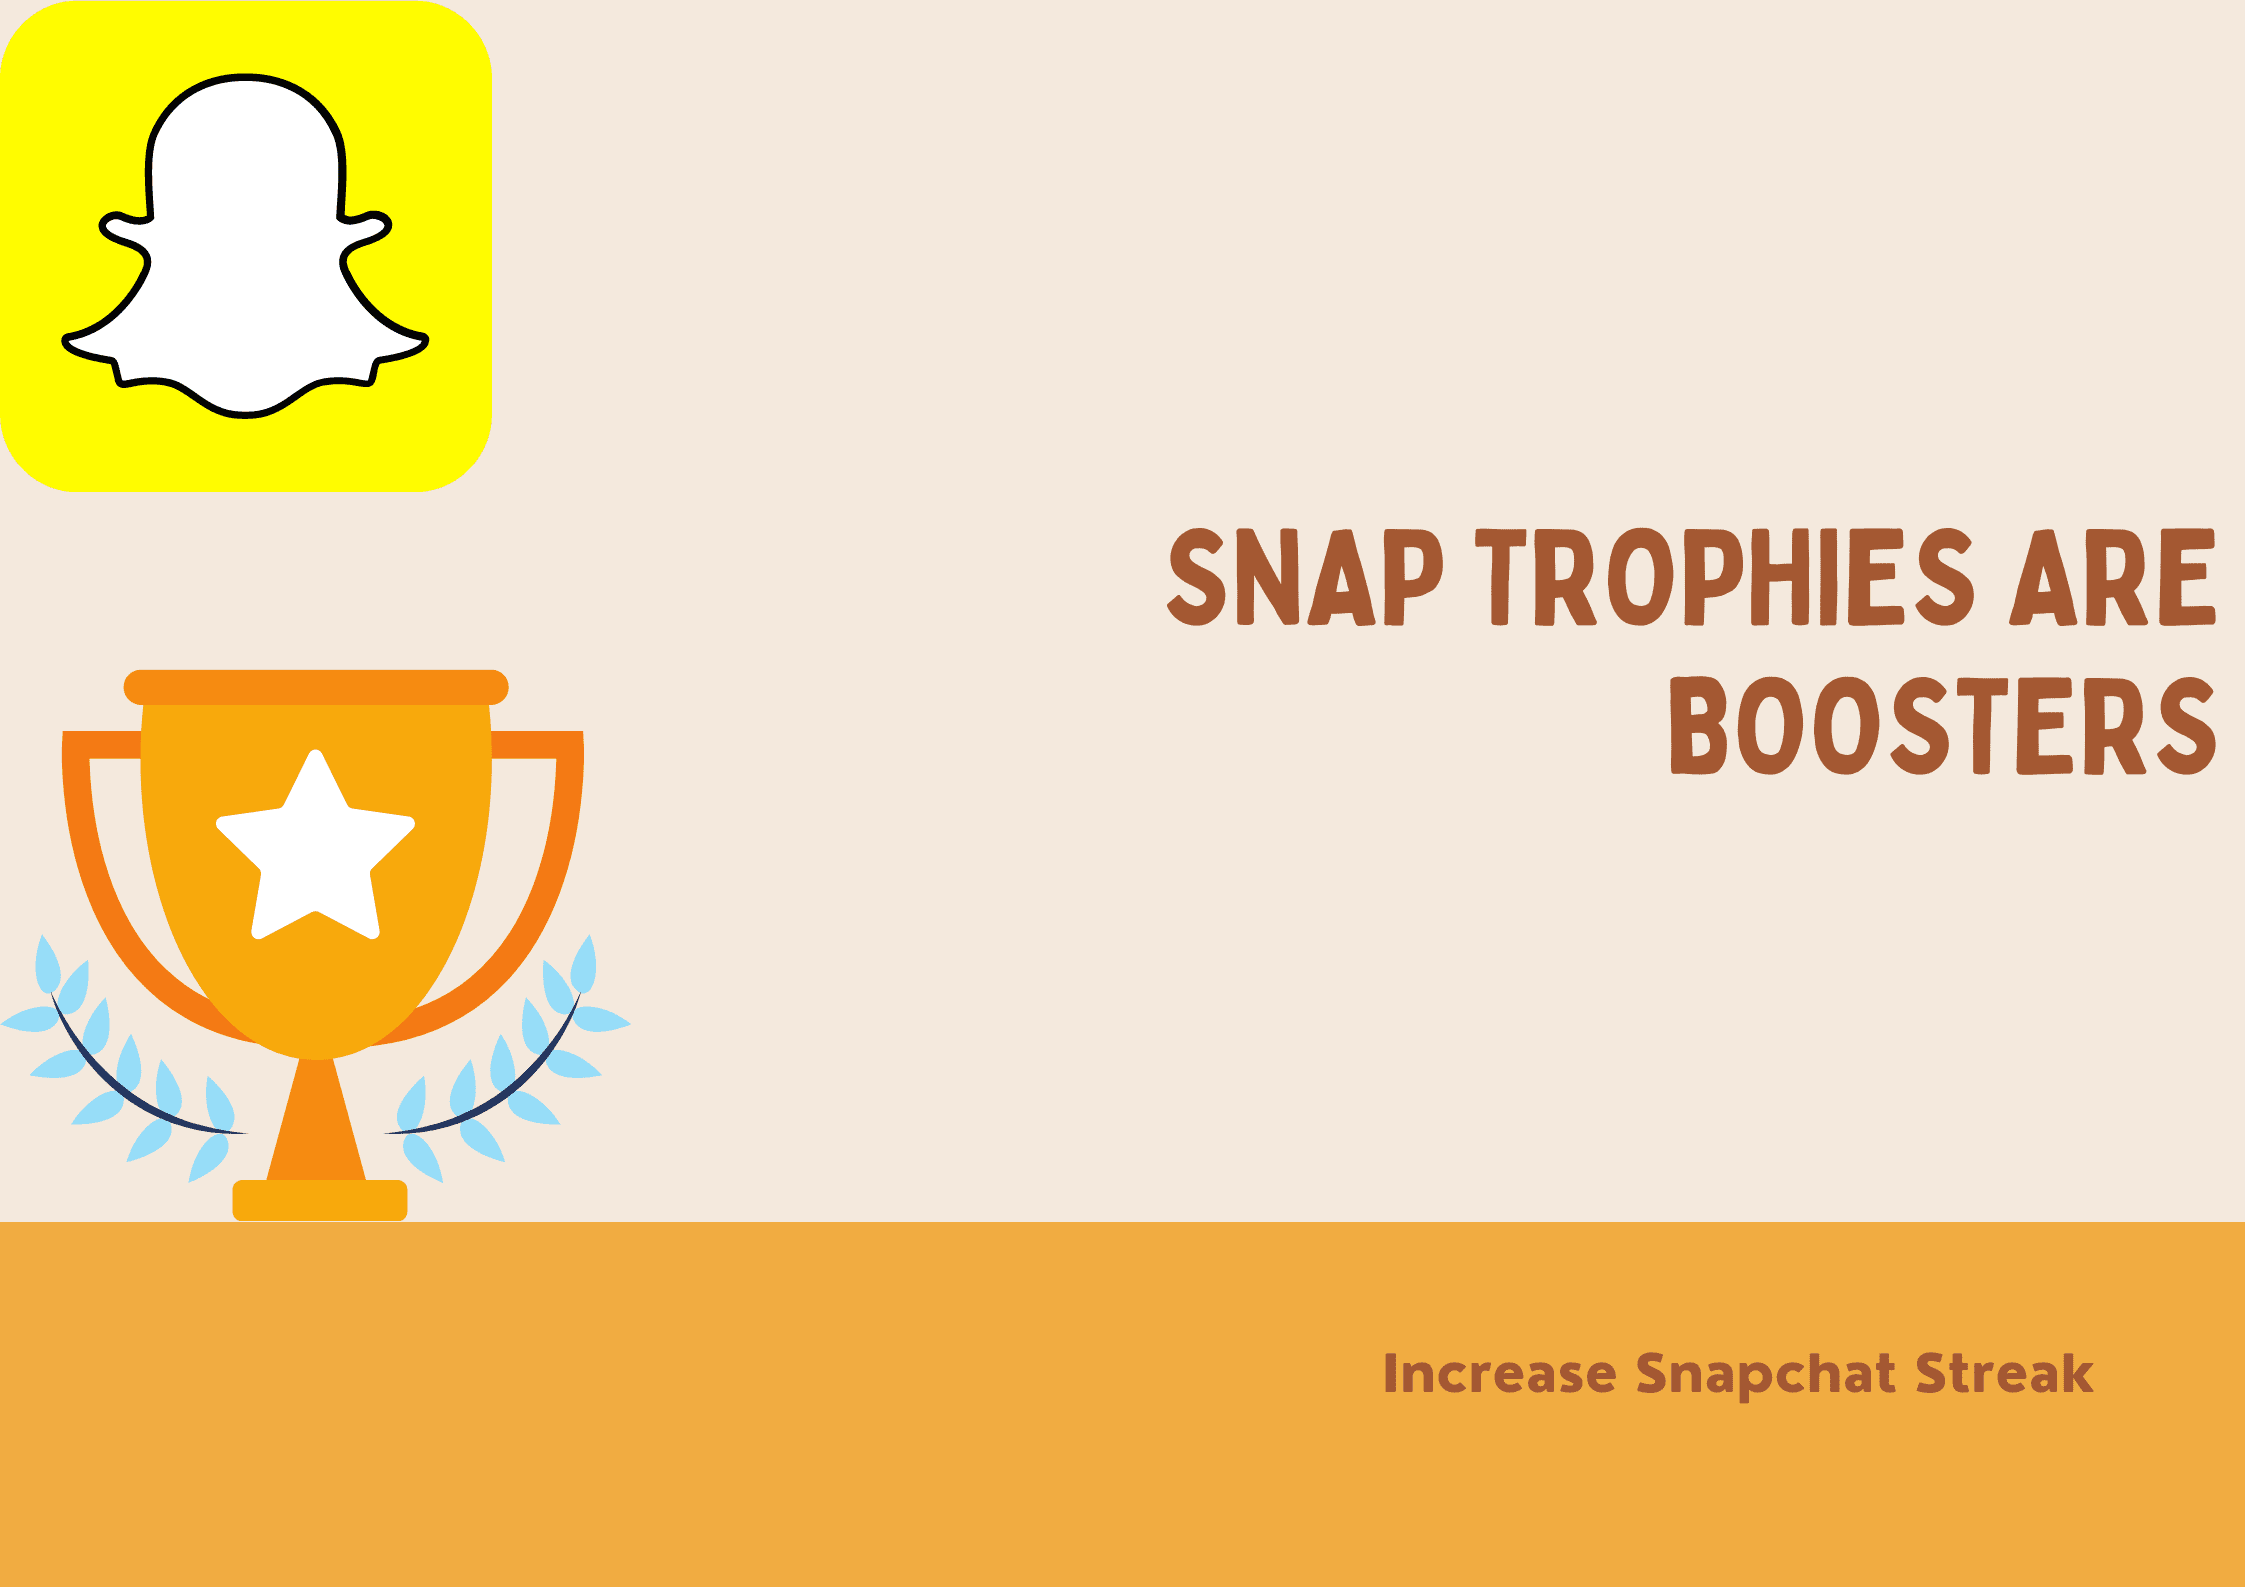 Snap trophies are boosters